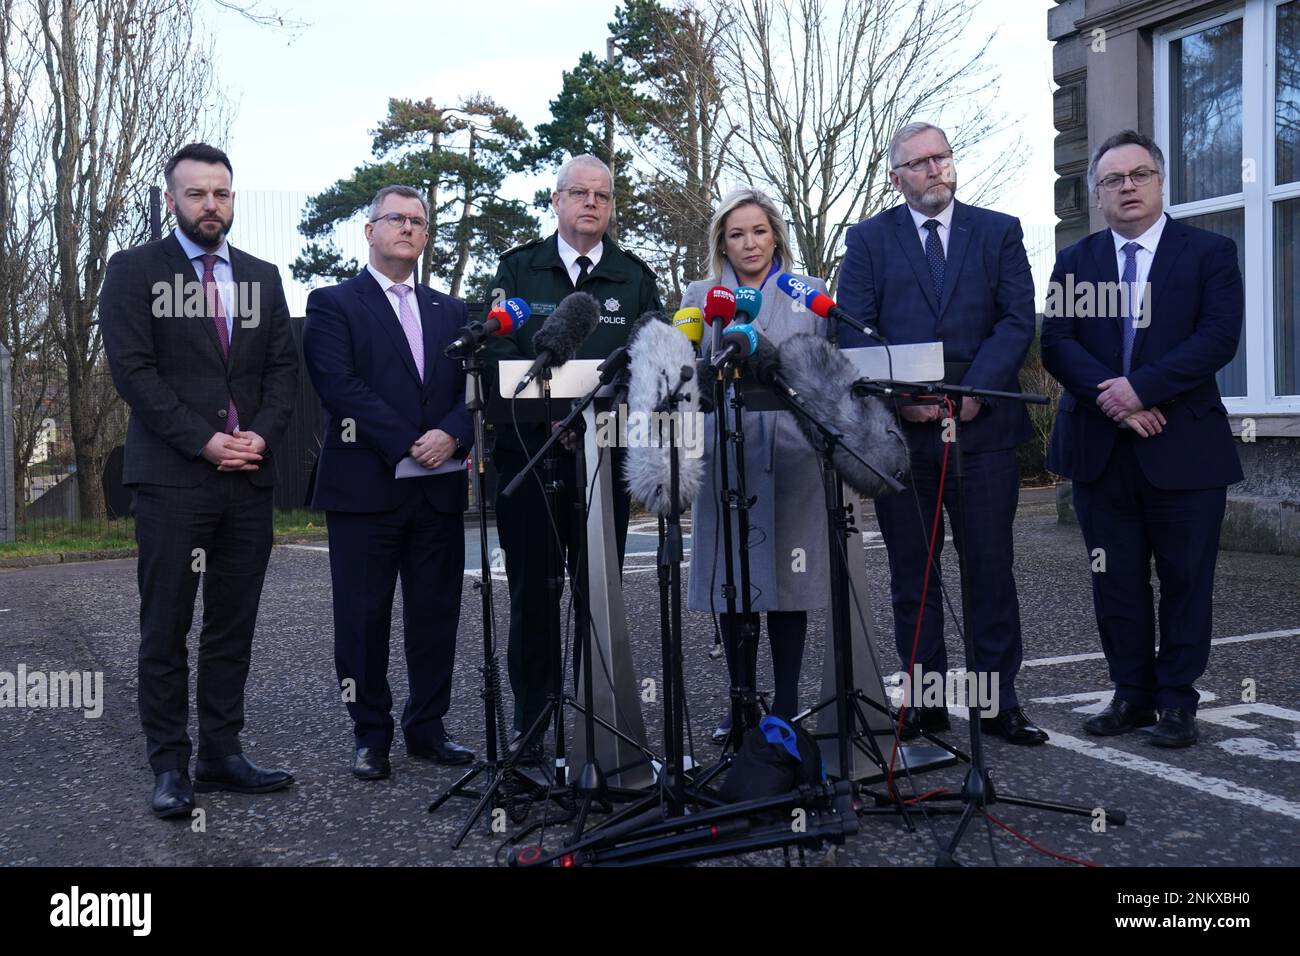 (left to right) SDLP leader Colum Eastwood, DUP leader Jeffrey Donaldson, Police Service of Northern Ireland (PSNI) Chief Constable Simon Byrne, Sinn Fein deputy leader Michelle O'Neill, Ulster Unionist Party (UUP) leader Doug Beattie, and Stephen Farry from the Alliance party, speaking to the media outside the PSNI HQ in Belfast, where they are meeting following the shooting of PSNI Detective Chief Inspector John Caldwell on Wednesday. Picture date: Friday February 24, 2023. Stock Photo